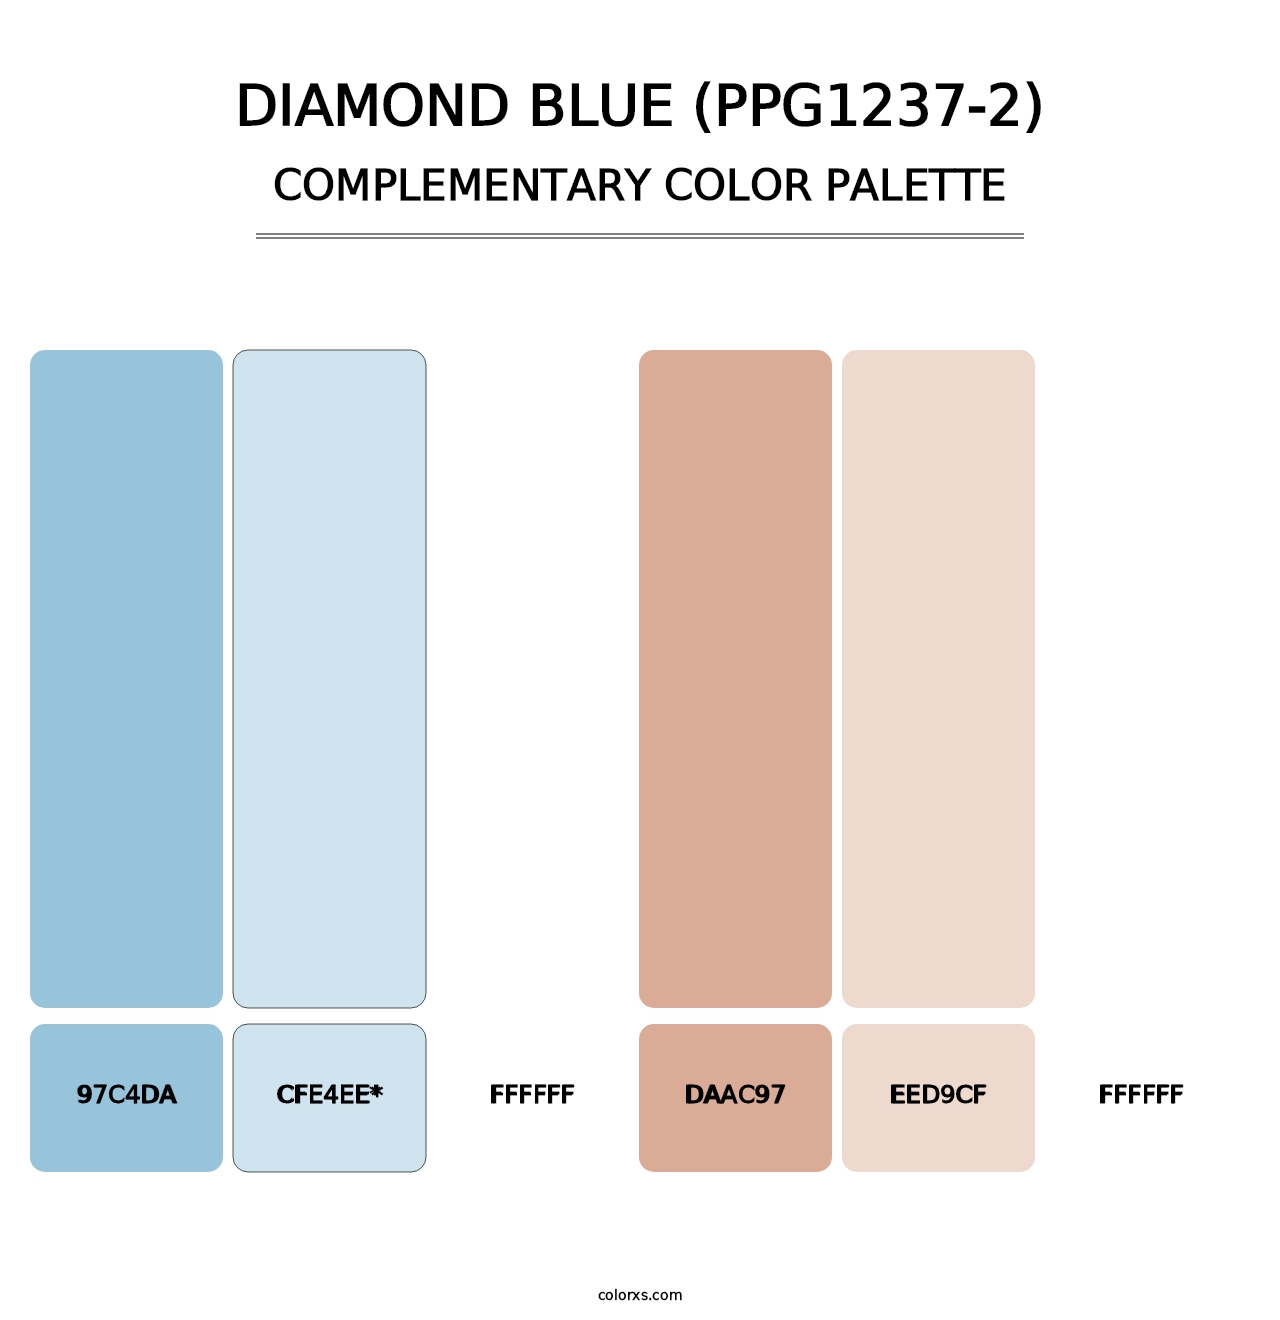 Diamond Blue (PPG1237-2) - Complementary Color Palette